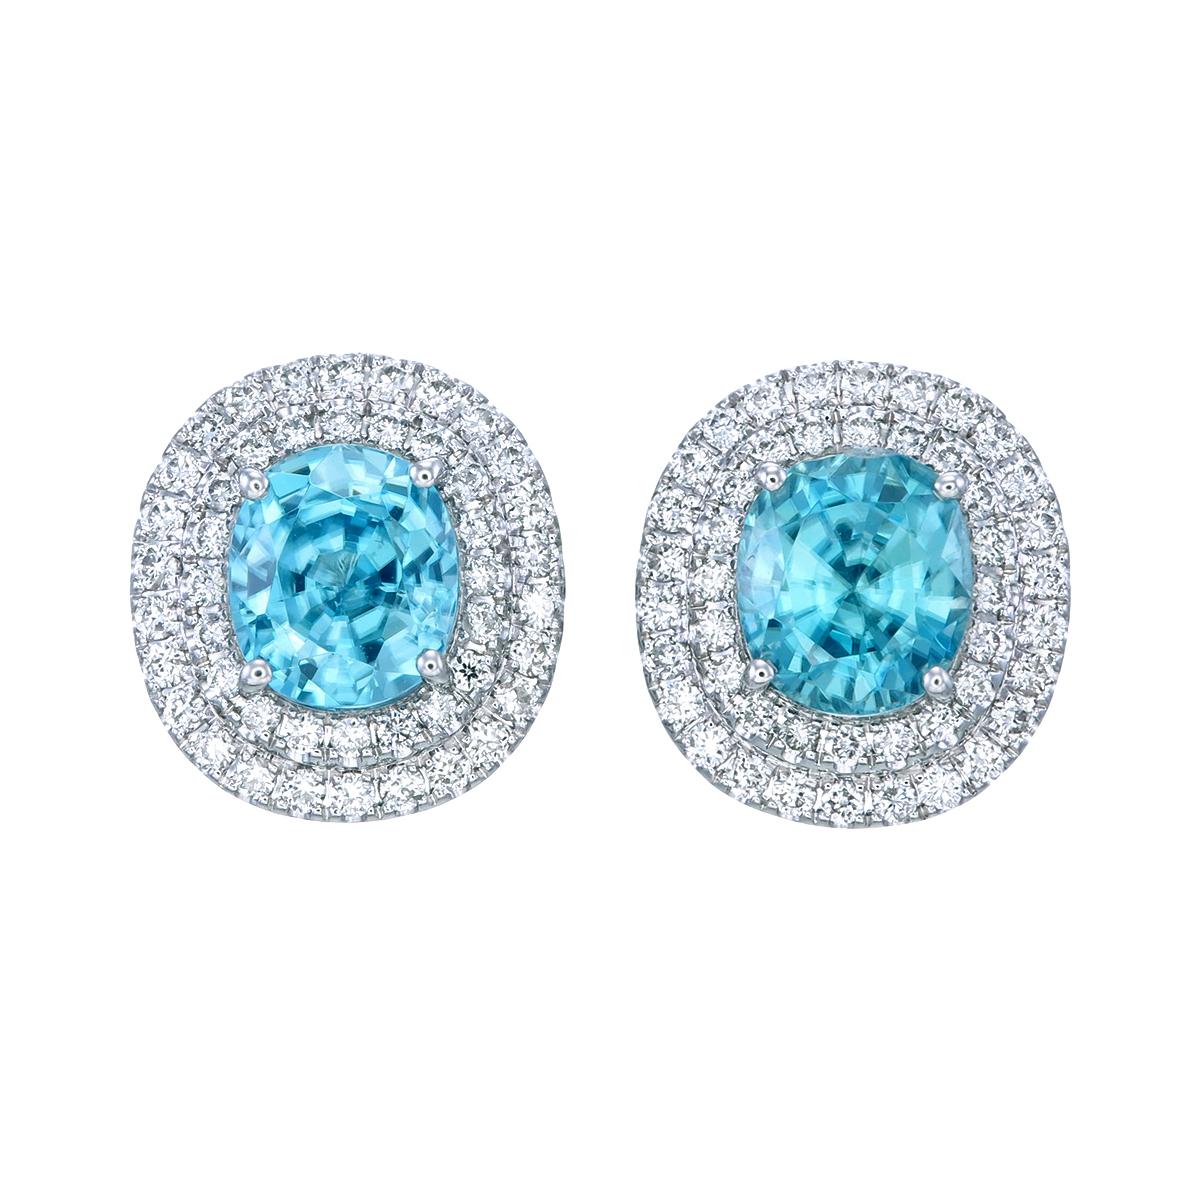 Orloff of Denmark's; Glacial Duet Earrings.
Ratanakiri Zircon Diamond Earrings.

Channeling the crisp and cool shades of winter, these earrings are a true embodiment of elegance. The ice blue zircon, encircled by dazzling diamonds, evokes images of